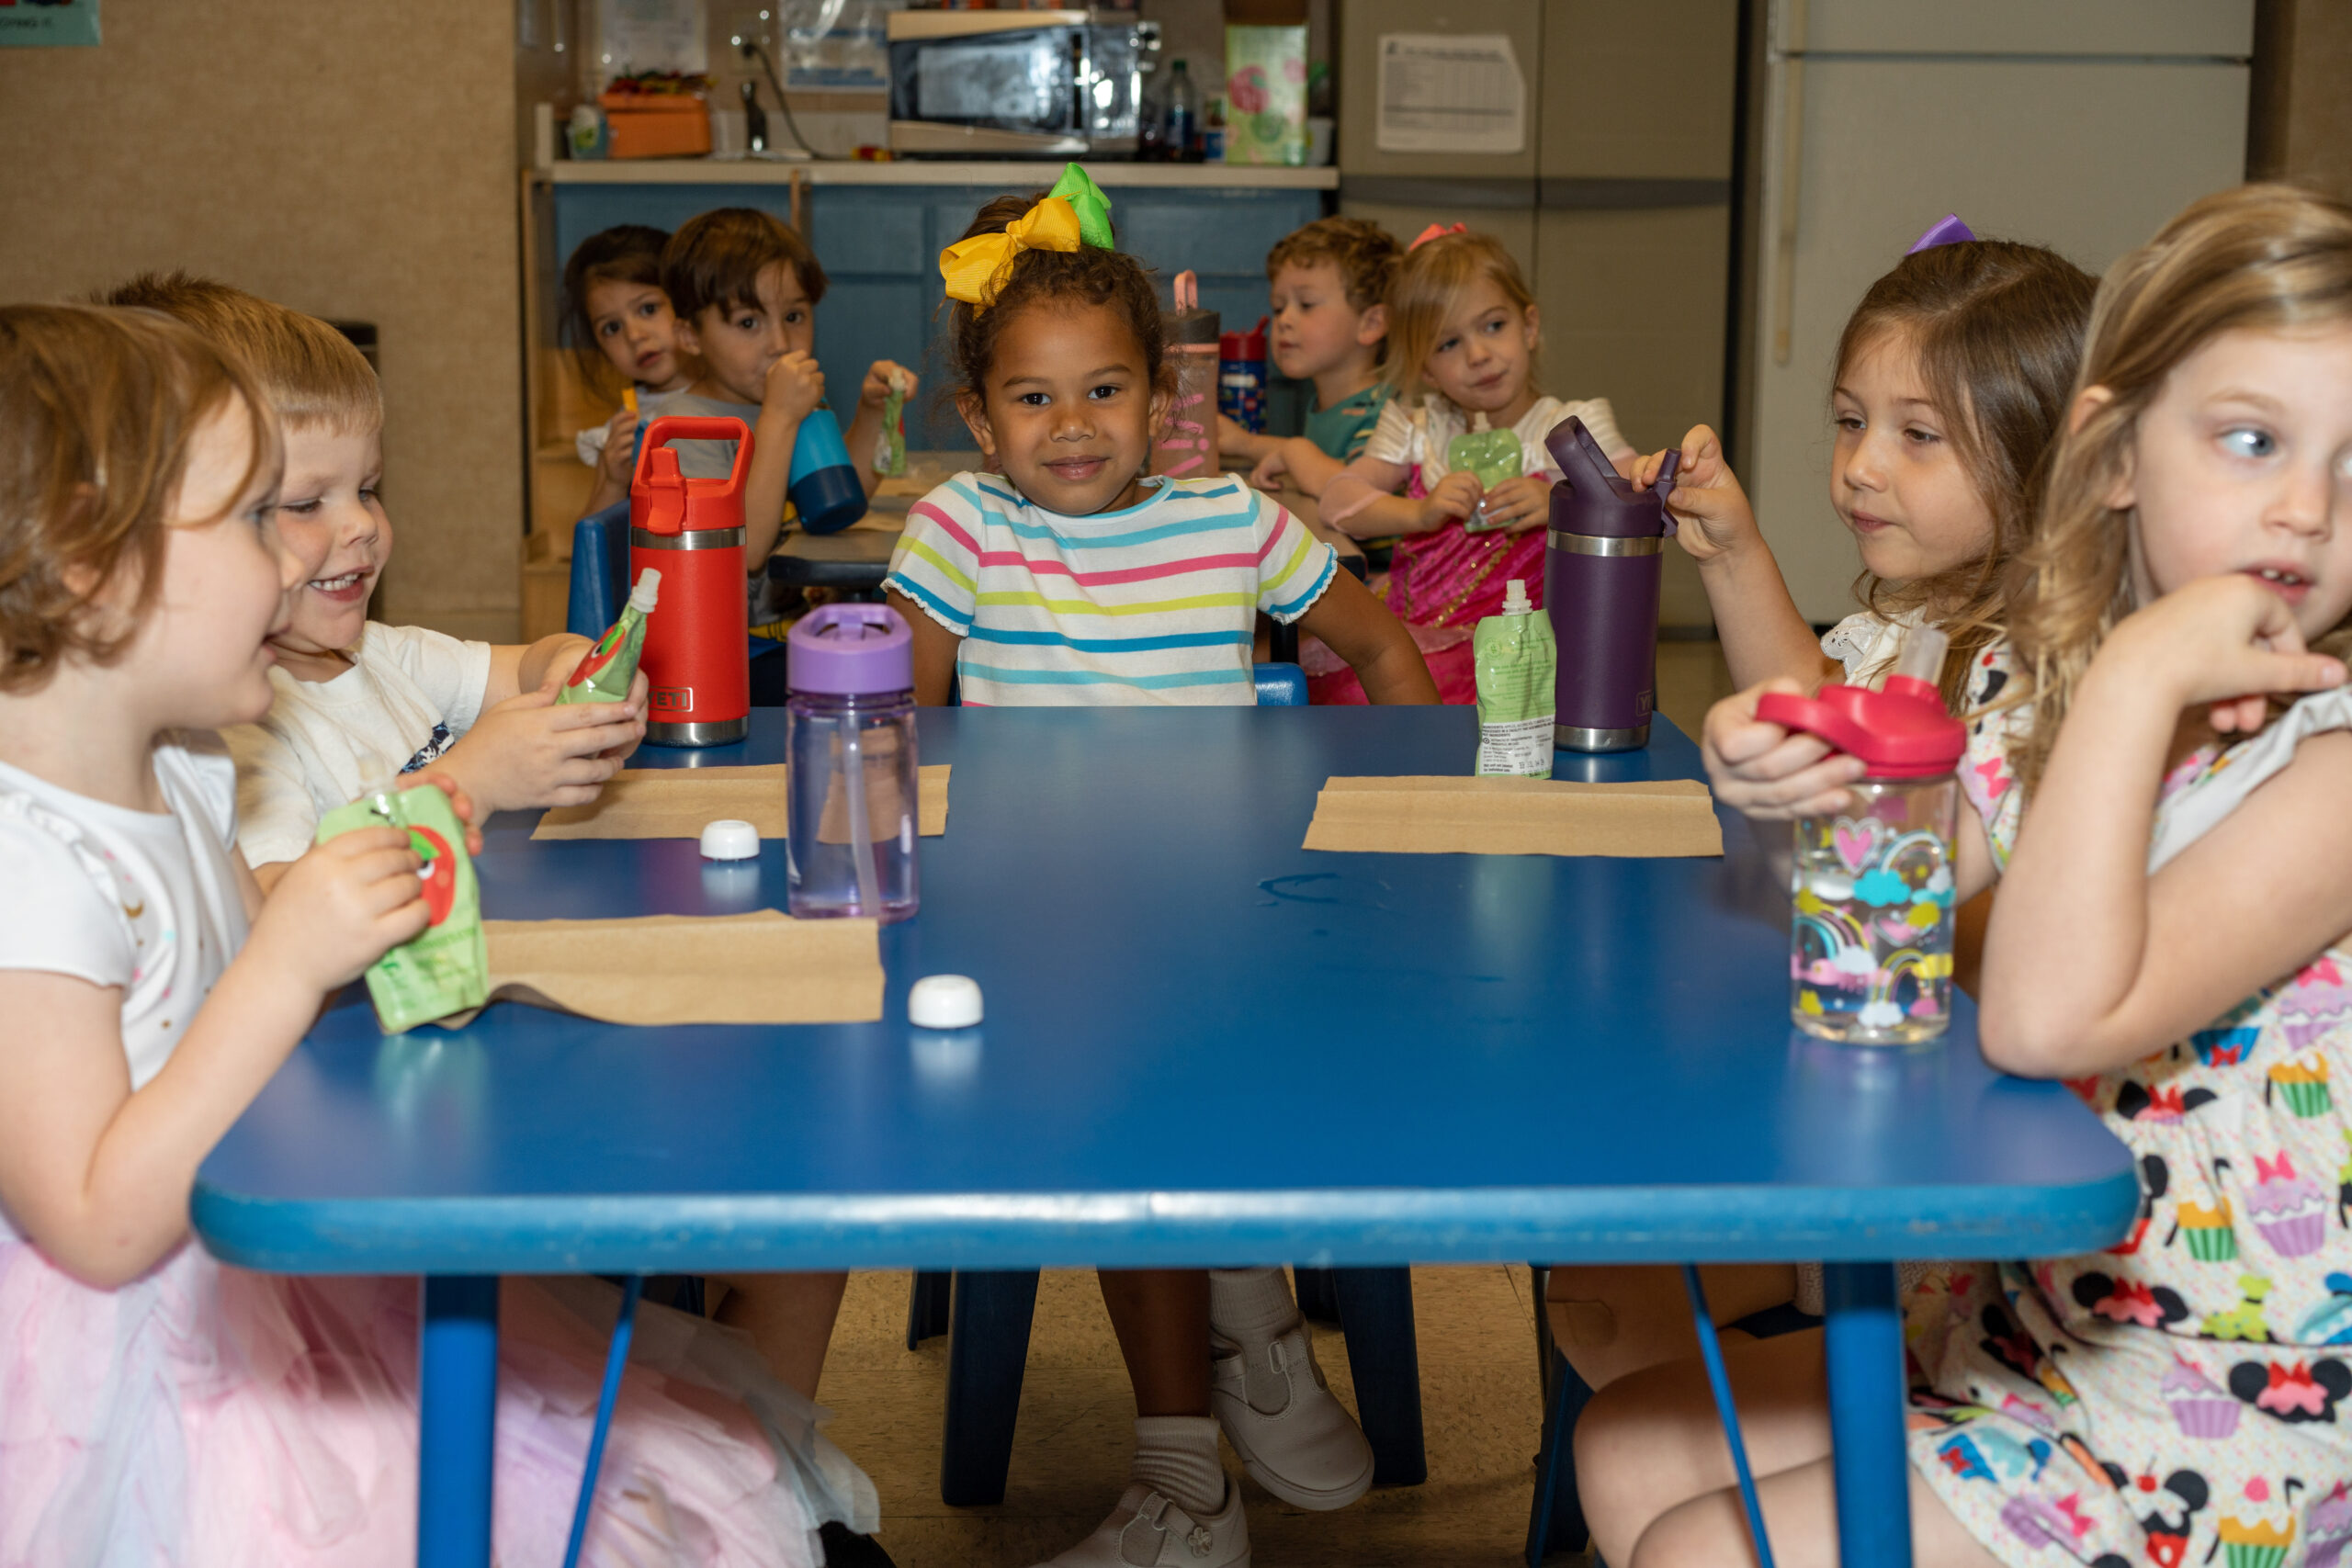 Five children sit at a blue table eating applesauce pouches and drinking water. In the center, a little girl wearing a striped shirt and yellow bow looks at the camera. In the background, four more children sit at another table eating.